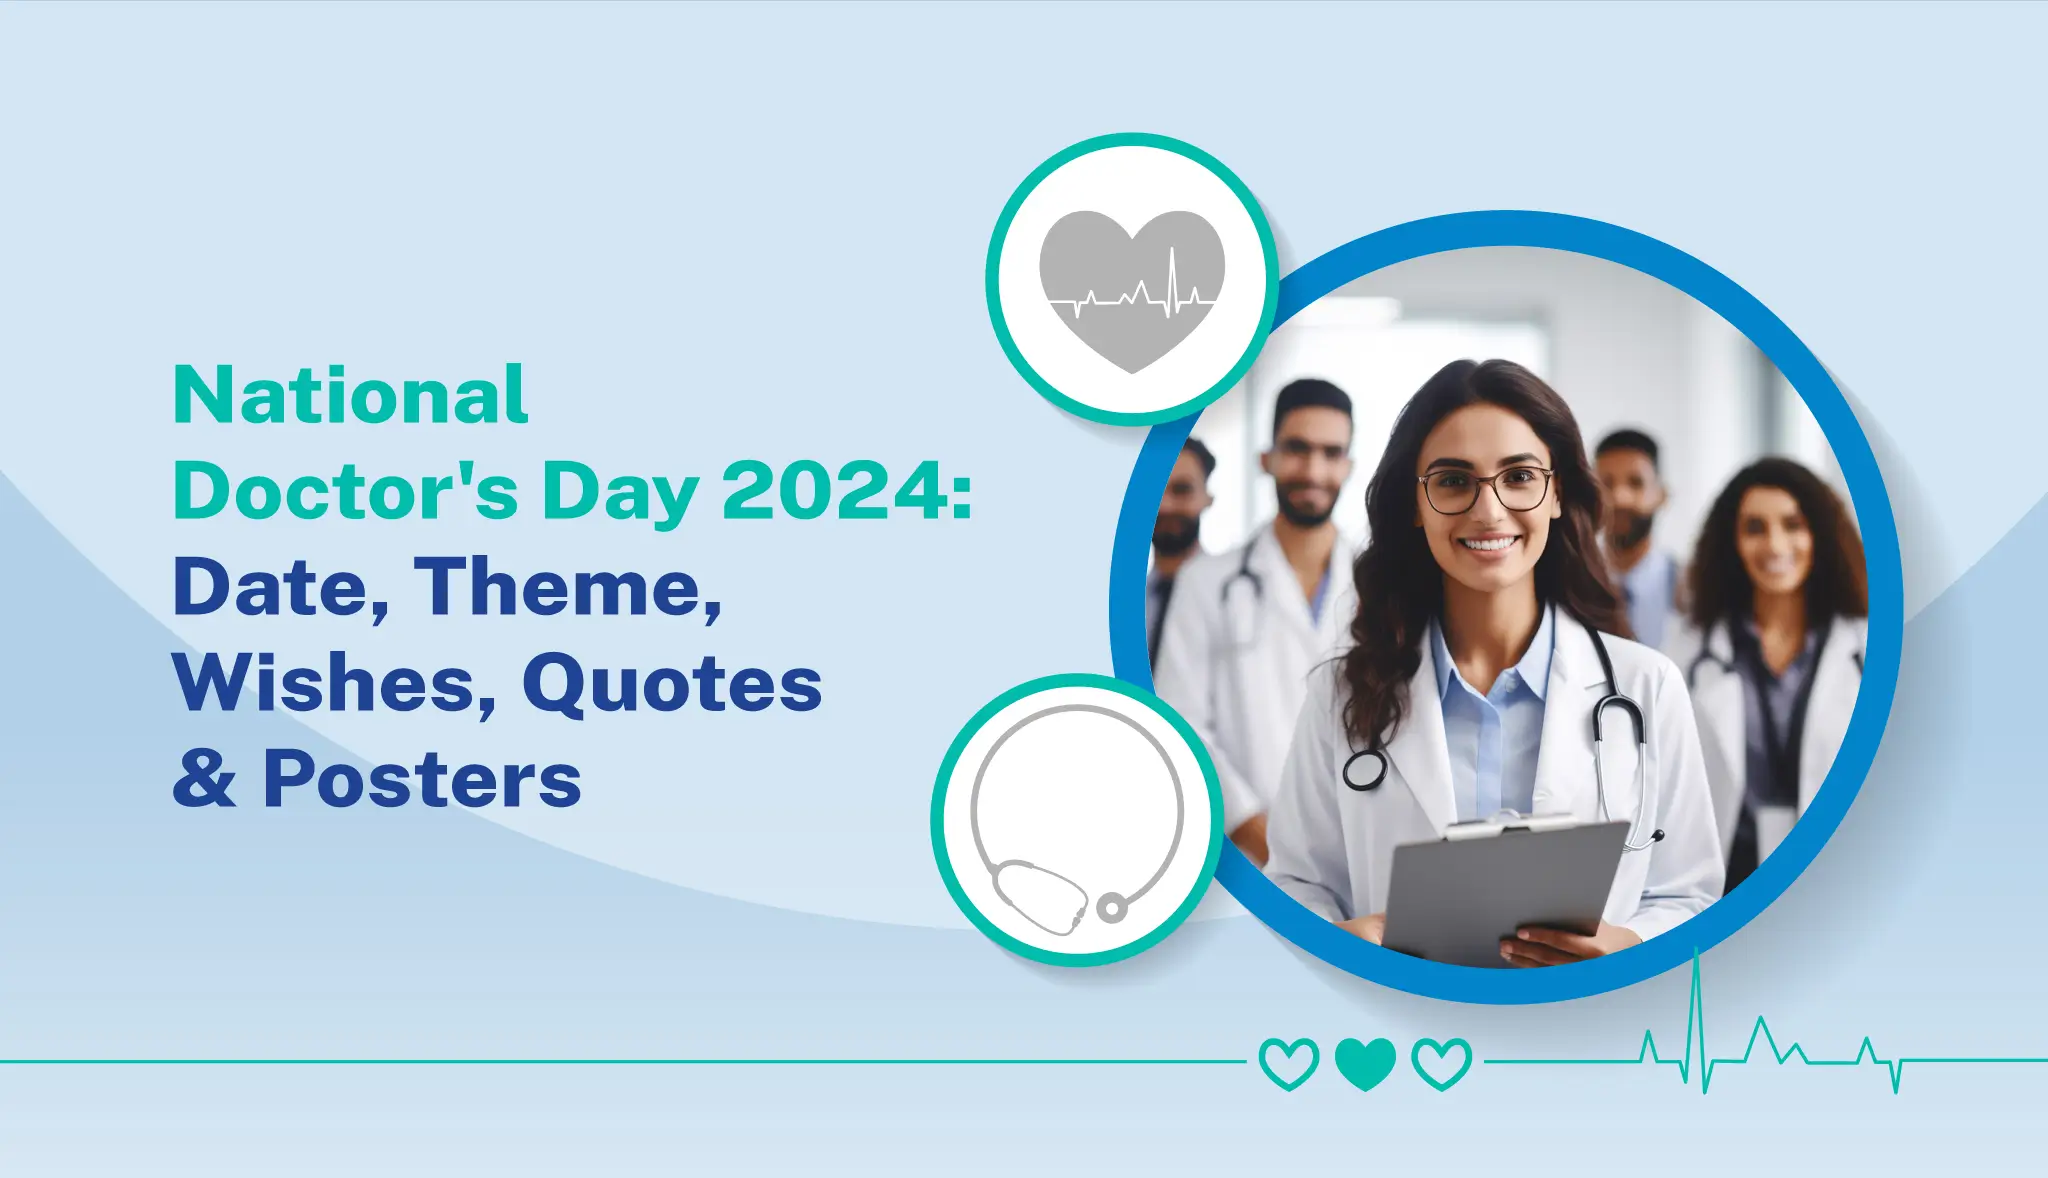 Doctor's 2024: Date, Theme, Wishes, Quotes & Posters - Postive